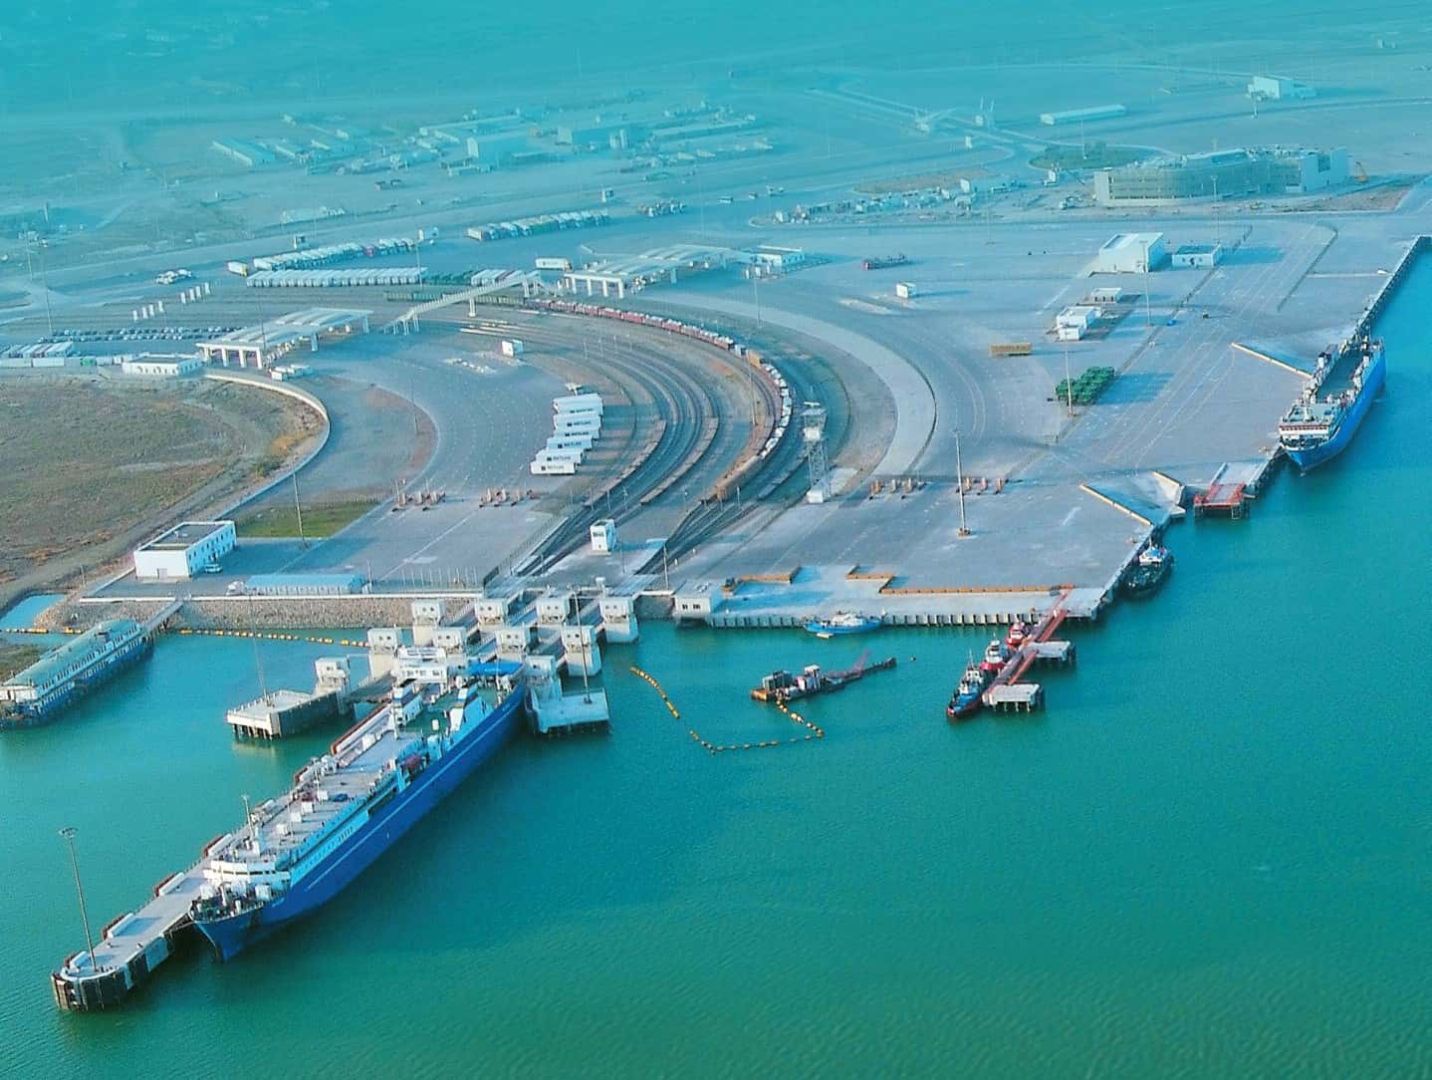 Alat port operation to be jeopardised by Caspian Sea level fall, WB says